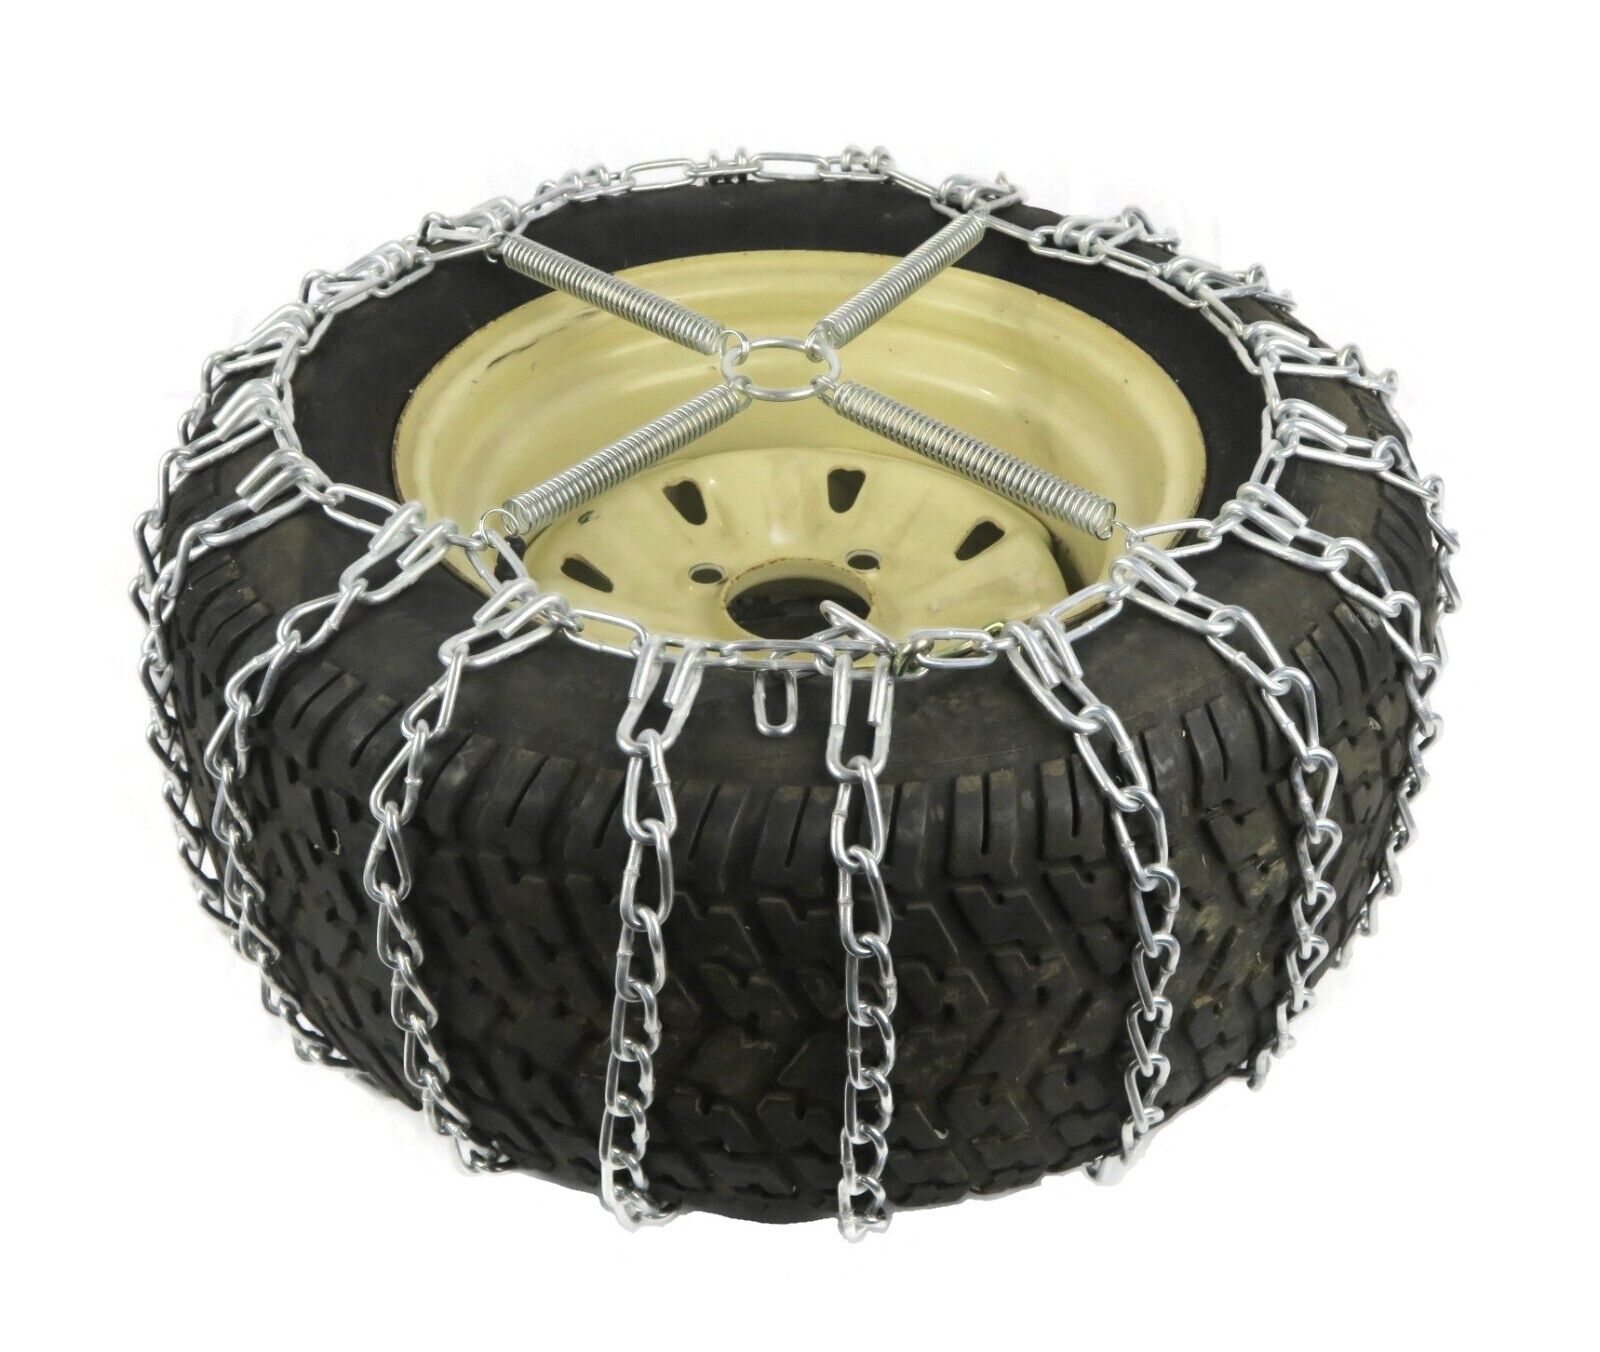 The ROP Shop | 2 Link Tire Chain & Tensioners Pair for Arctic Cat HDX with 26x12x12, 25x10x8 - image 5 of 9